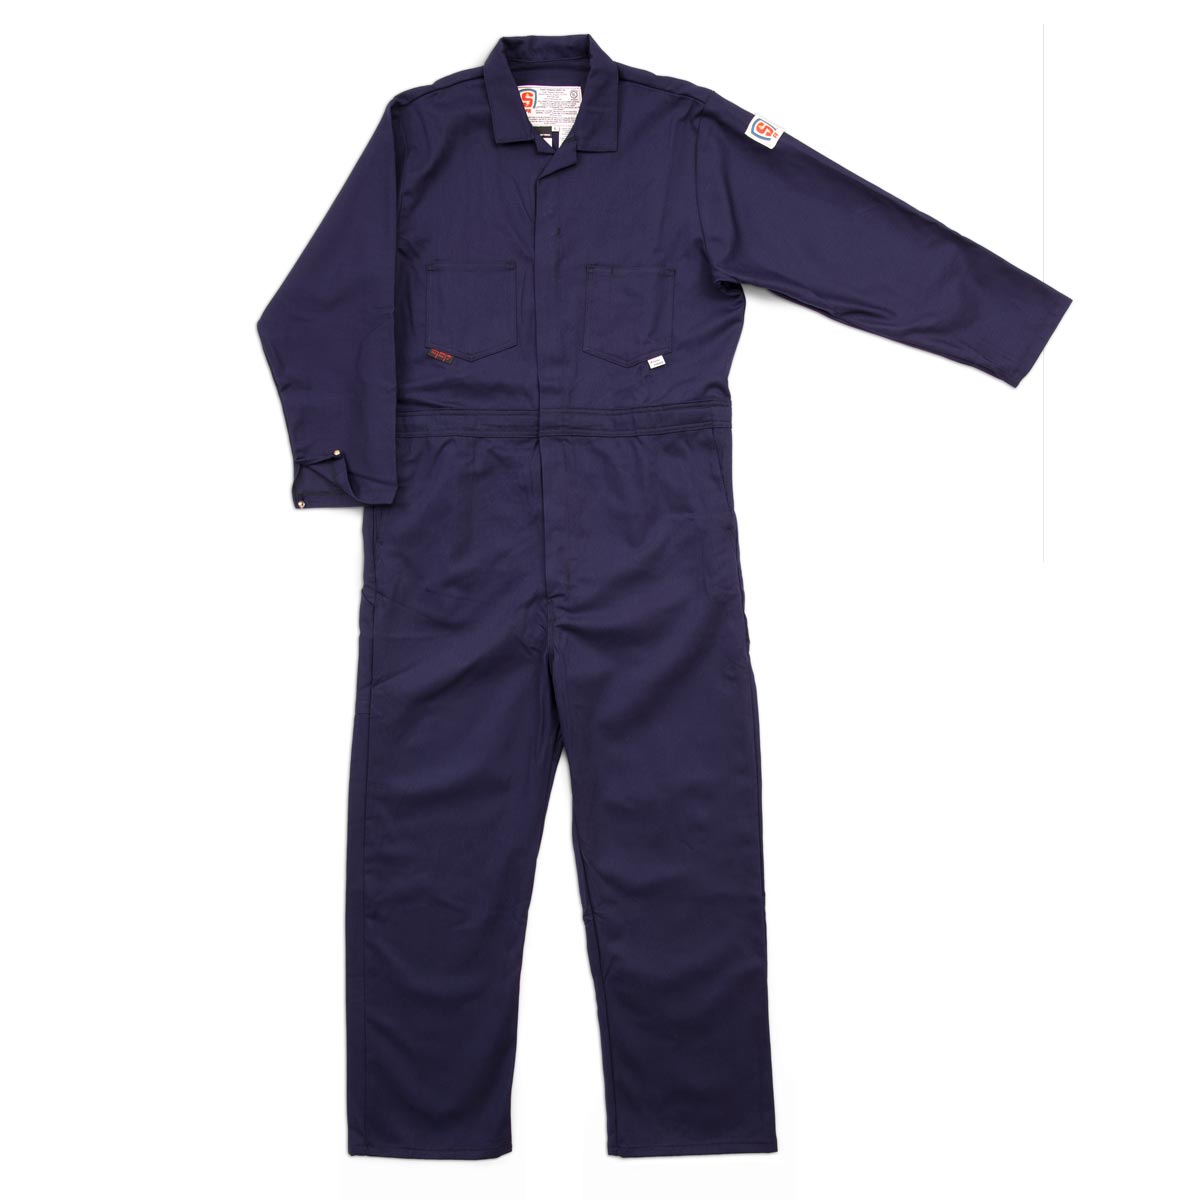 FRC681 - Full-Featured Contractor Style Coverall - Safety Supplies ...